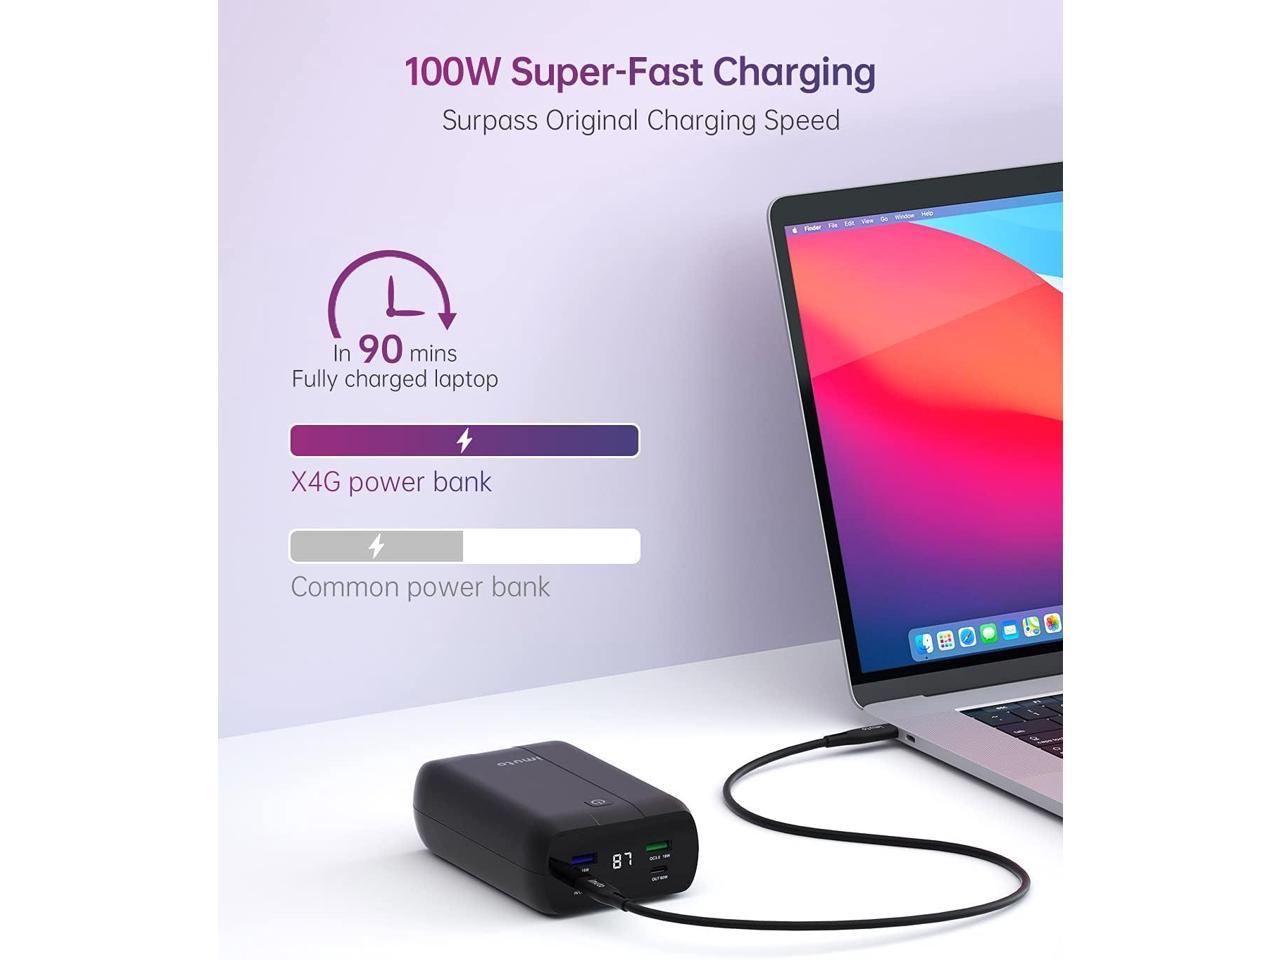 iPad & More Samsung S10 Note 10 Wireless Portable Charger imuto Power Bank 20000mAh External Battery Pack with LED Digital Display & 2 USB Outputs Fast Charge for iPhone 11 Pro Max XS Max X 8 Plus 